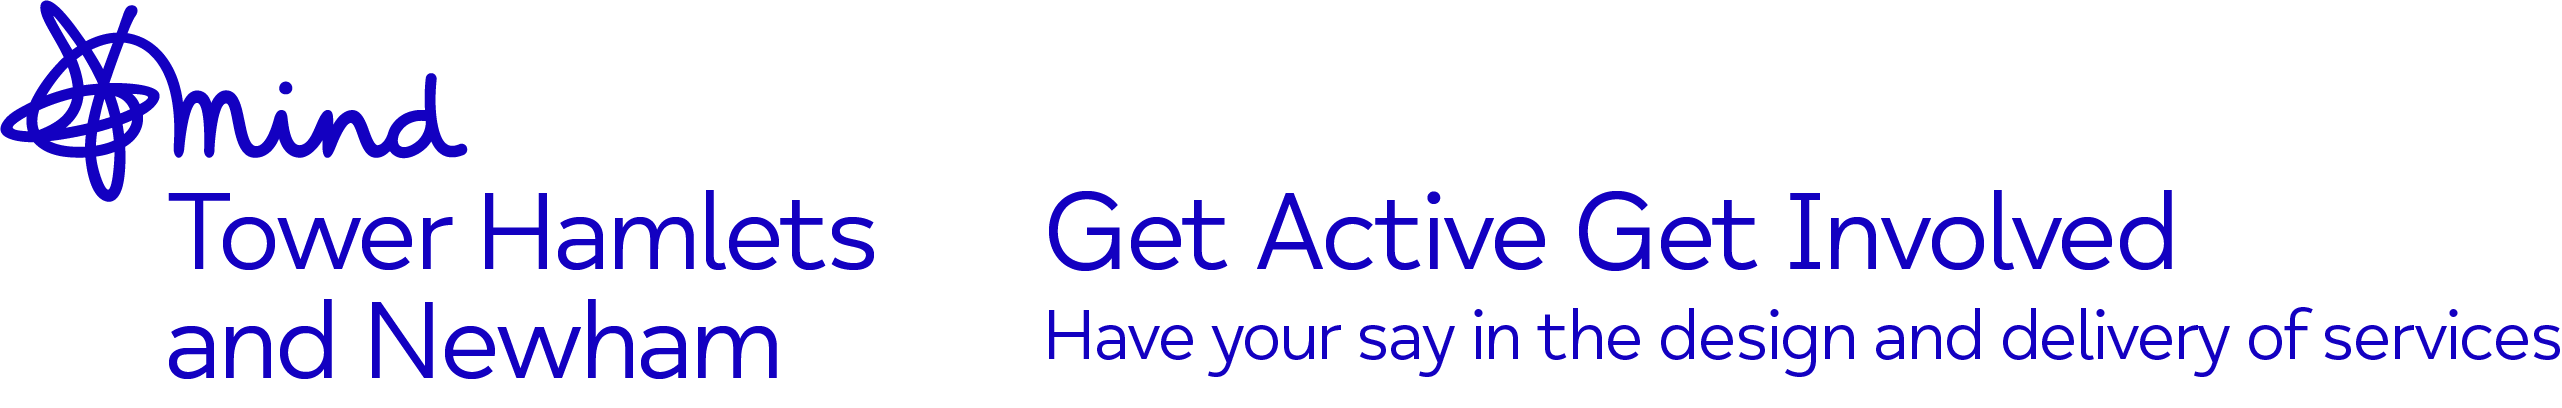 Get Active Get Involved